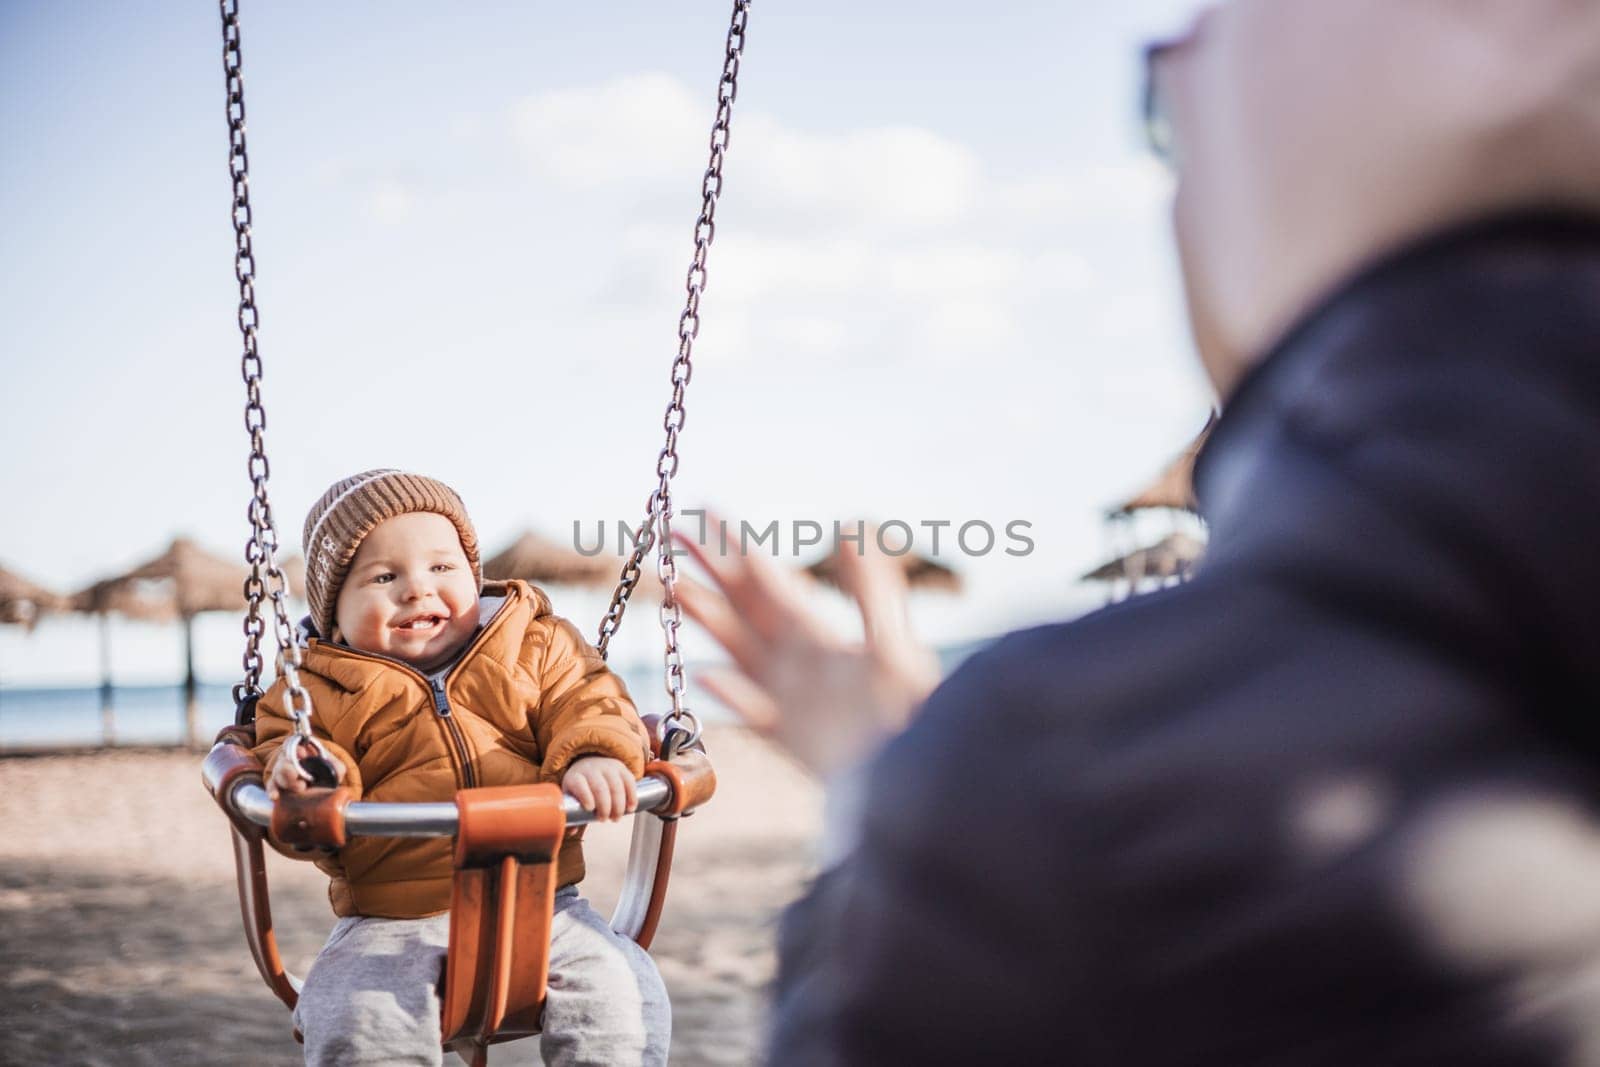 Mother pushing her cheerful infant baby boy child on a swing on sandy beach playground outdoors on nice sunny cold winter day in Malaga, Spain. by kasto